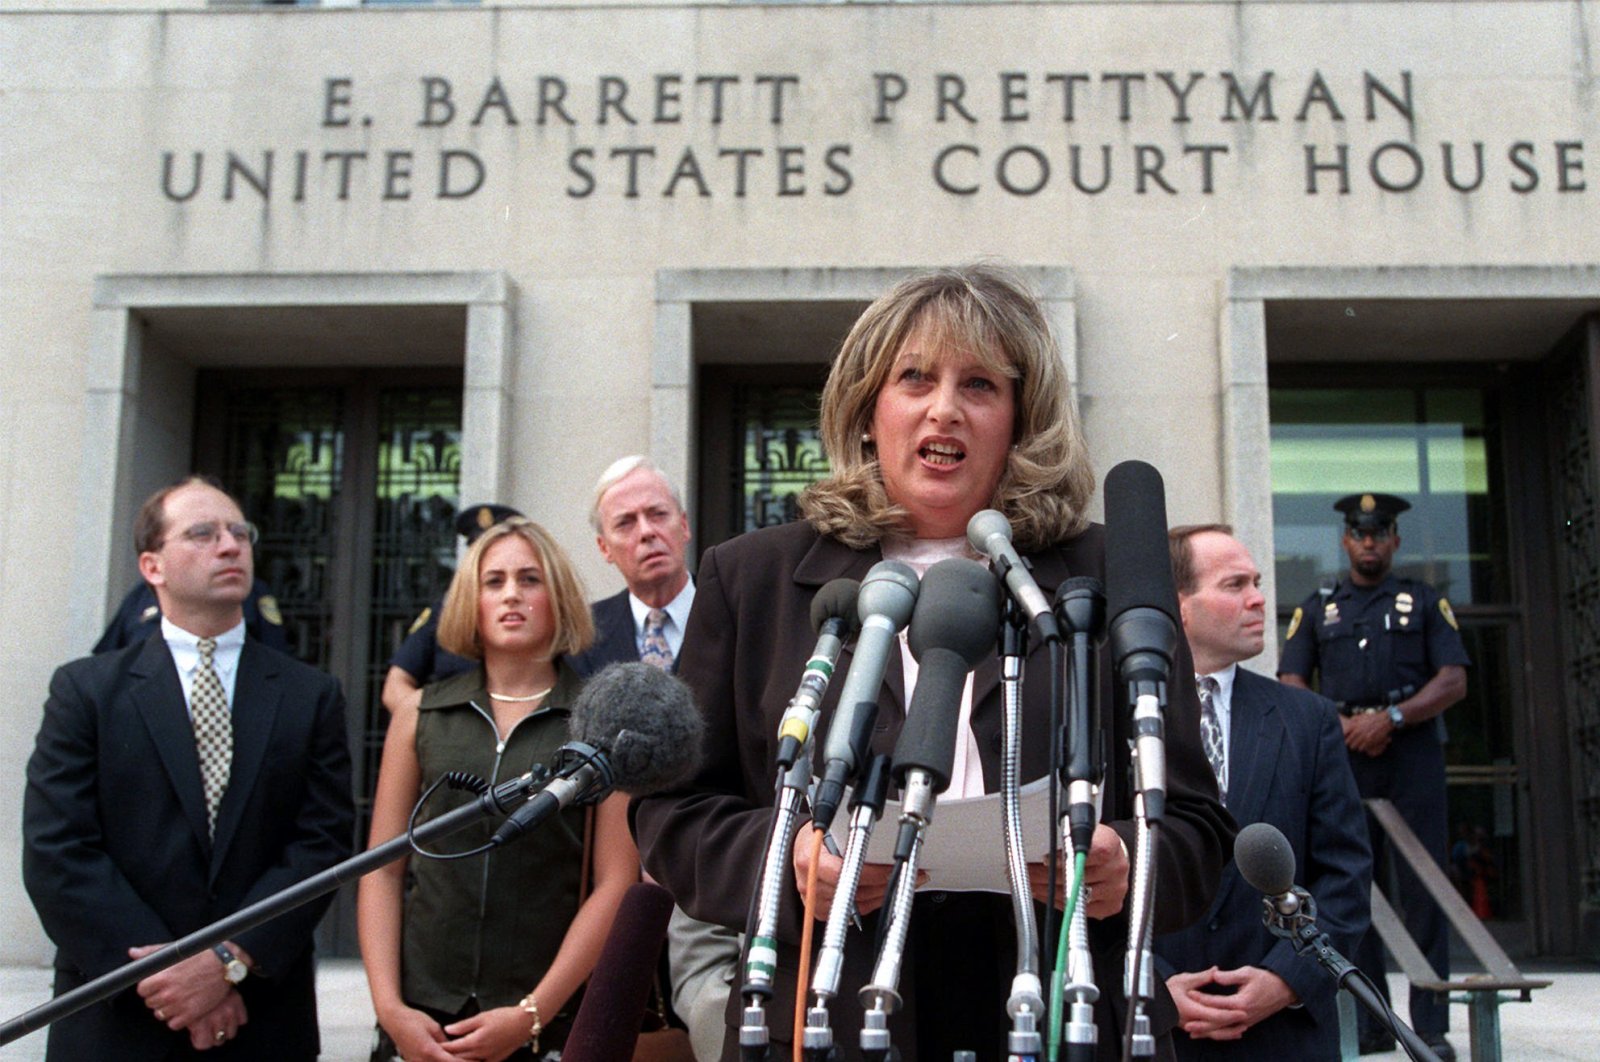 In this July 29, 1998, file photo Linda Tripp meets with reporters outside federal court in Washington after her final appearance before a grand jury investigating an alleged affair between President Bill Clinton and Monica Lewinsky. (AP Photo)